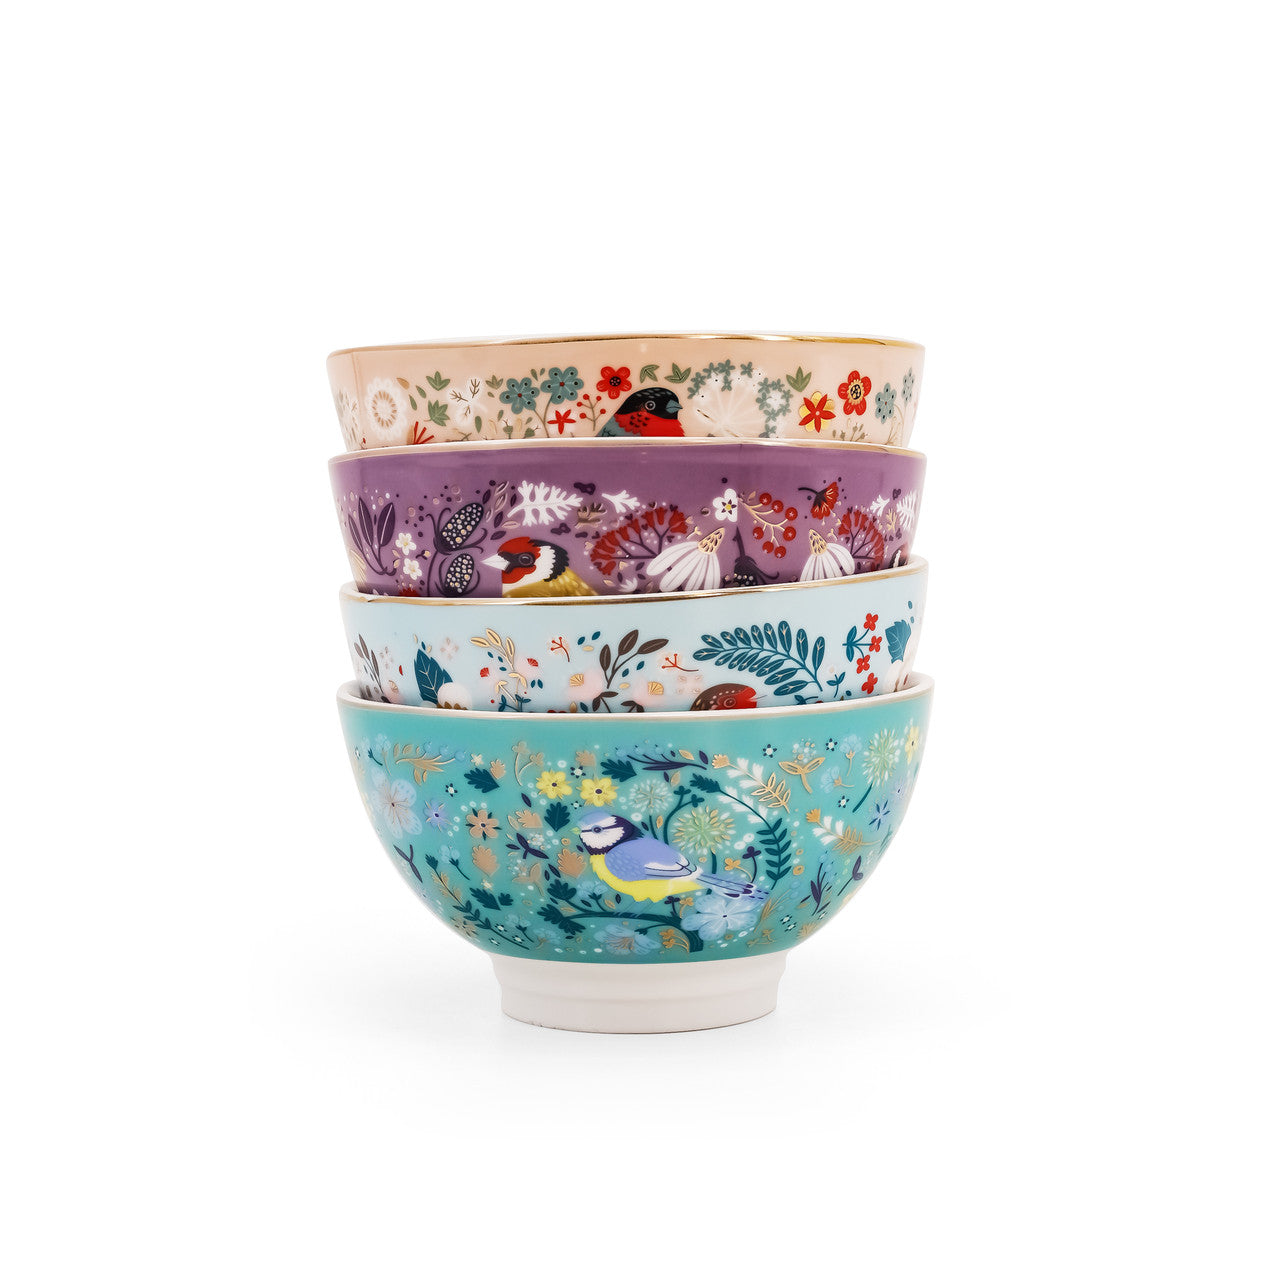 Tipperary Crystal Birdy Cereal Bowls Set of 4  - New 2022  New to our collection, this set of 4 cereal bowls come beautifully illustrated and presented in a rigid Tipperary Crystal gift box. Makes a wonderful gift to be enjoyed.  The Birdy Collection is a series of 6 exclusively commissioned illustrations inspired by native Irish birds; Bullfinch, Goldfinch, Blue tit, Greenfinch, Kingfisher and Robin.